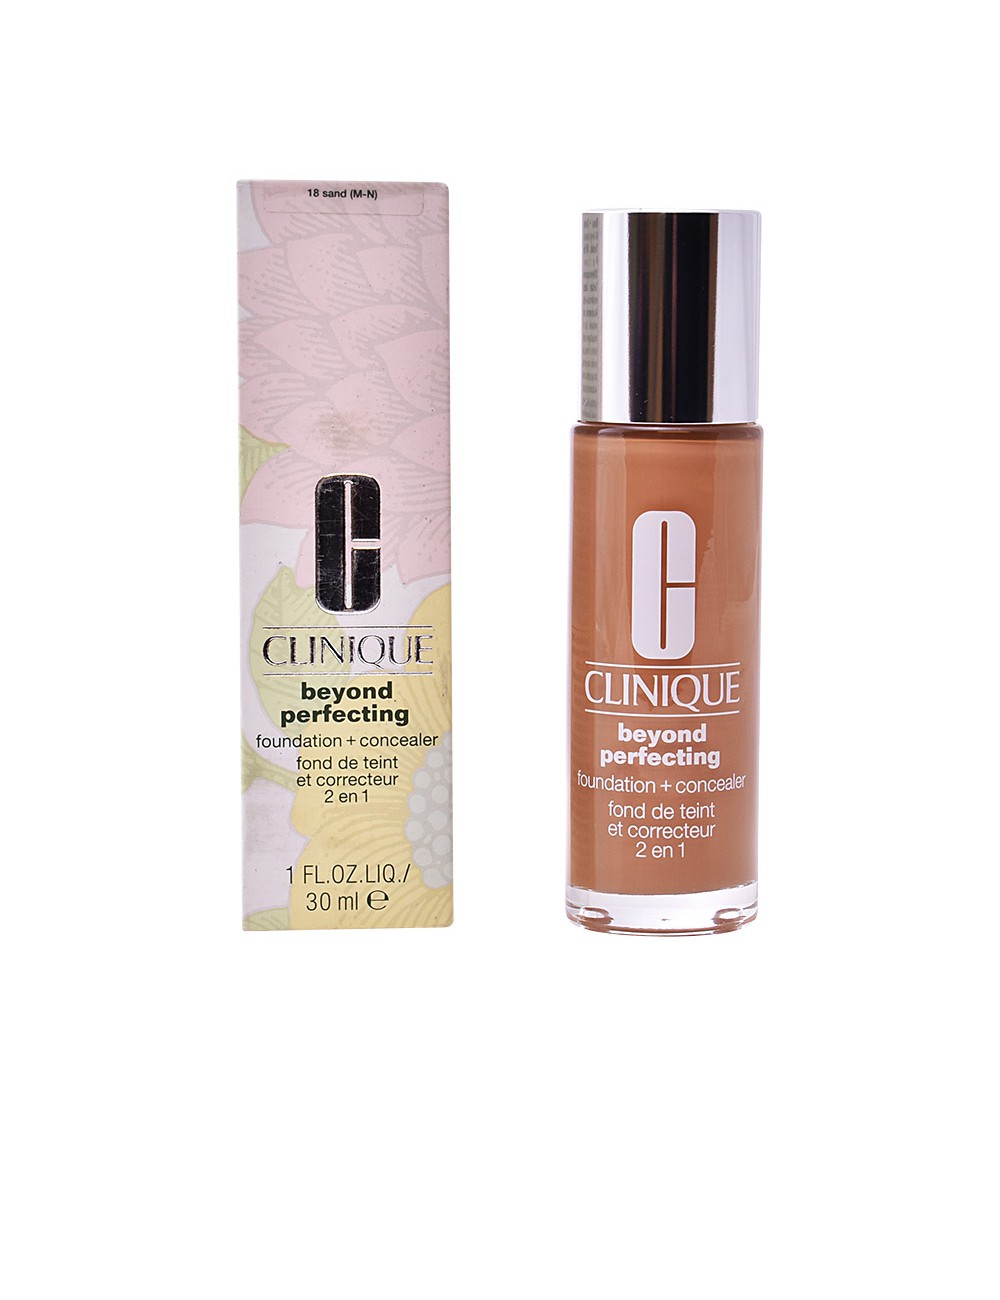 BEYOND PERFECTING foundation + concealer 18-sand 30 ml